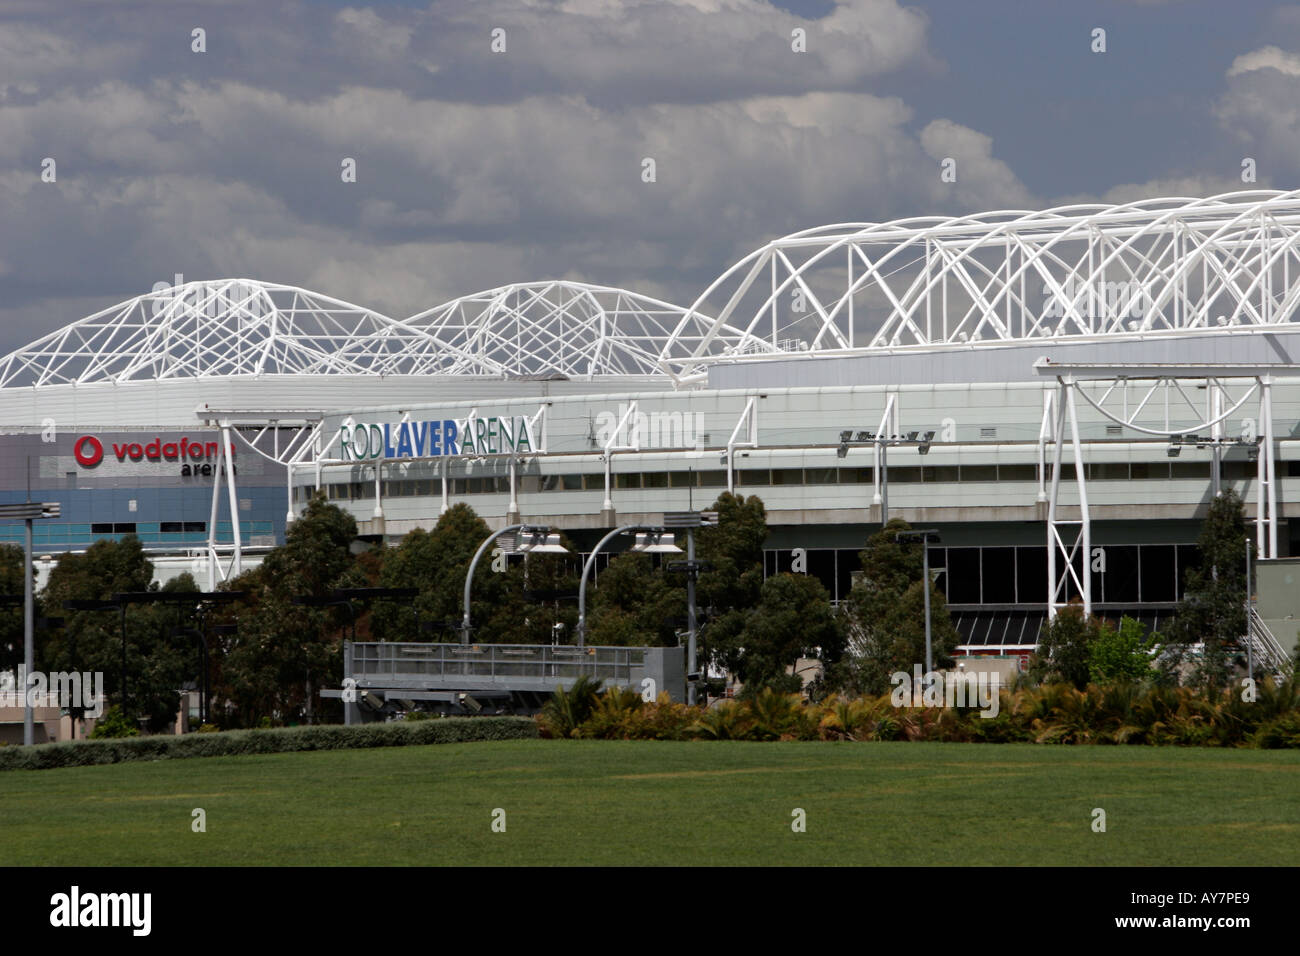 Vodafone Arena Rod Laver Arena Sports And Entertainment Centres Stock Photo Alamy